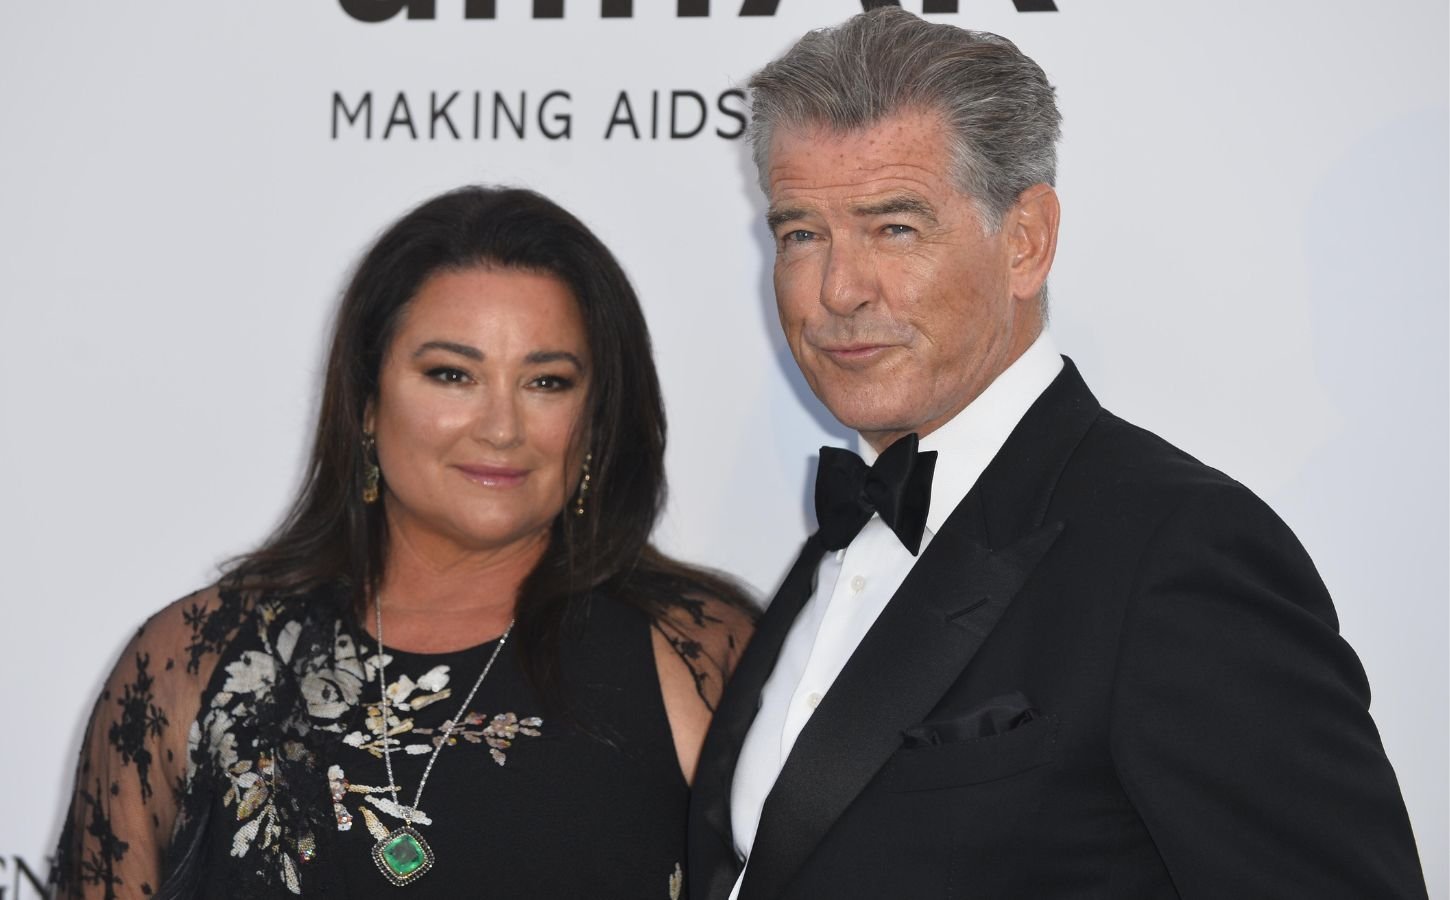 Pierce Brosnan and his wife Keely on the red carpet